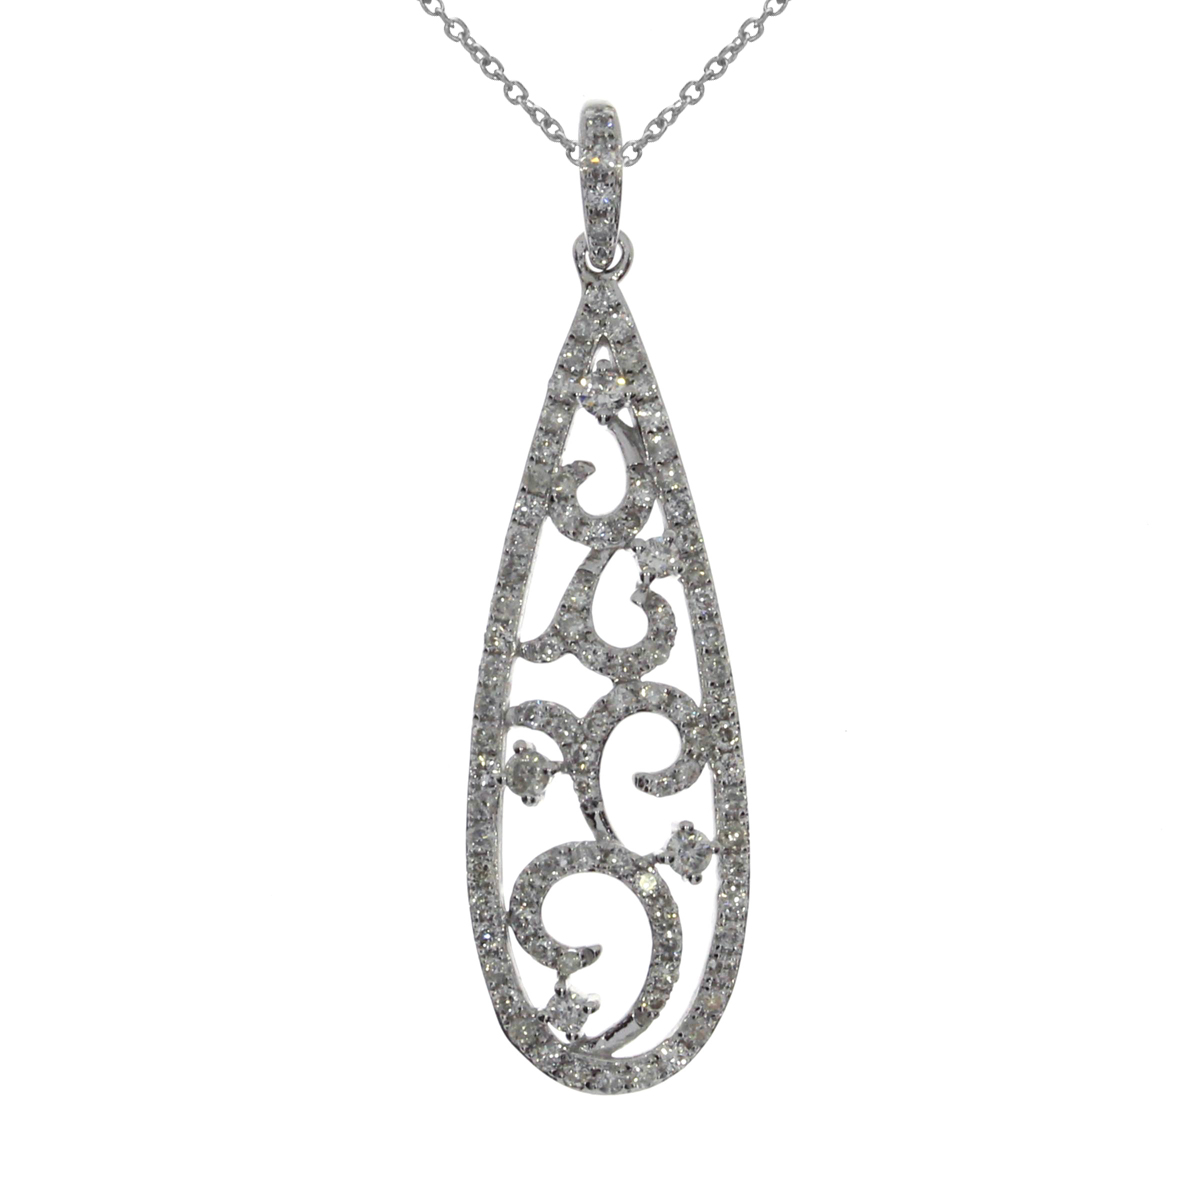 This long pendant contains .48 total carats of bright diamonds in modern and stylish design.